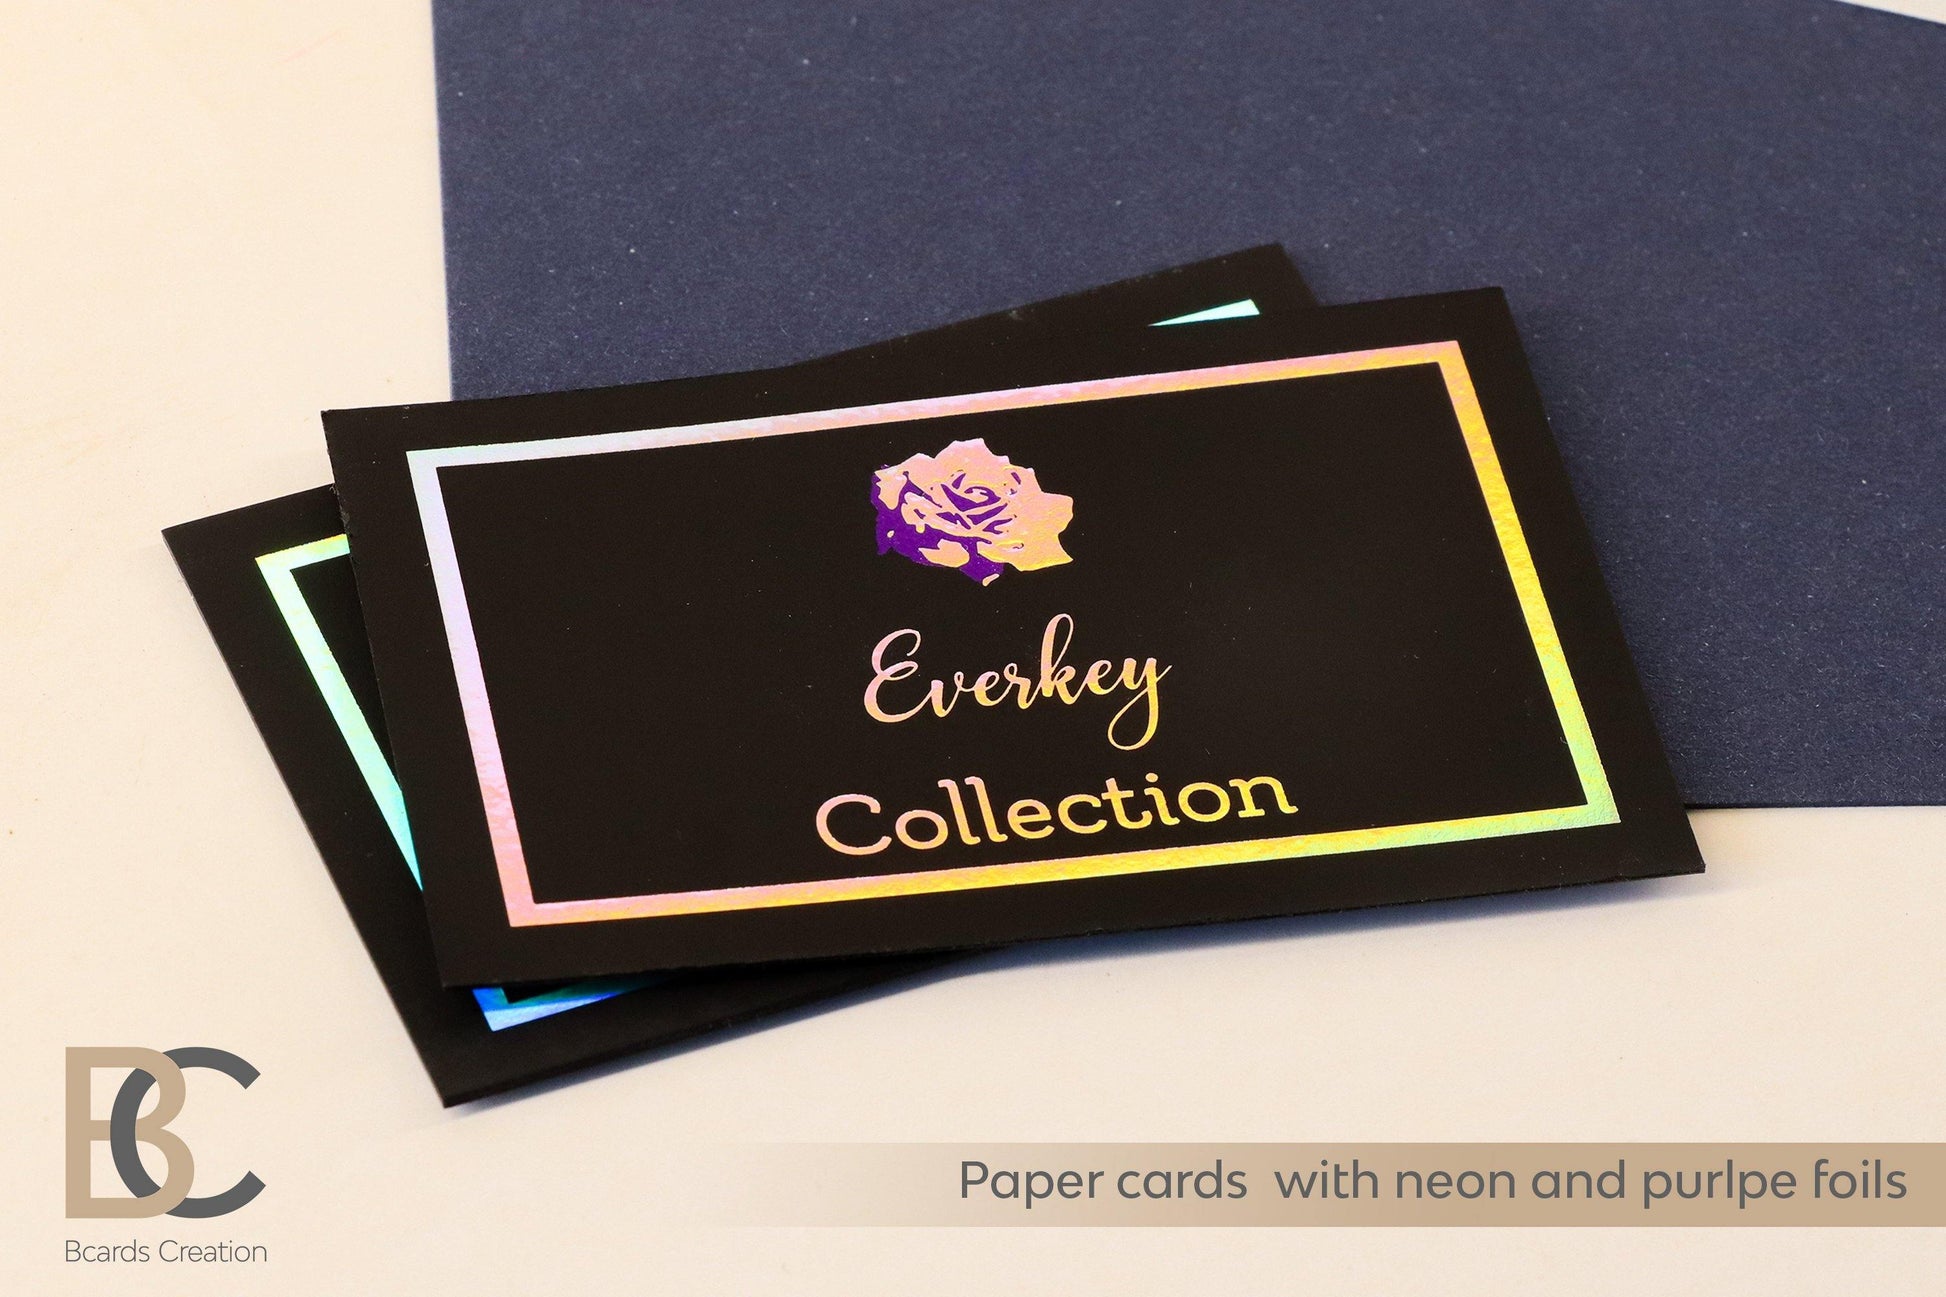 Fine Paper Double layered Business Card with Neon and Purple Foils, Thick Colored Paper Holographic Unique Business Cards - BcardsCreation